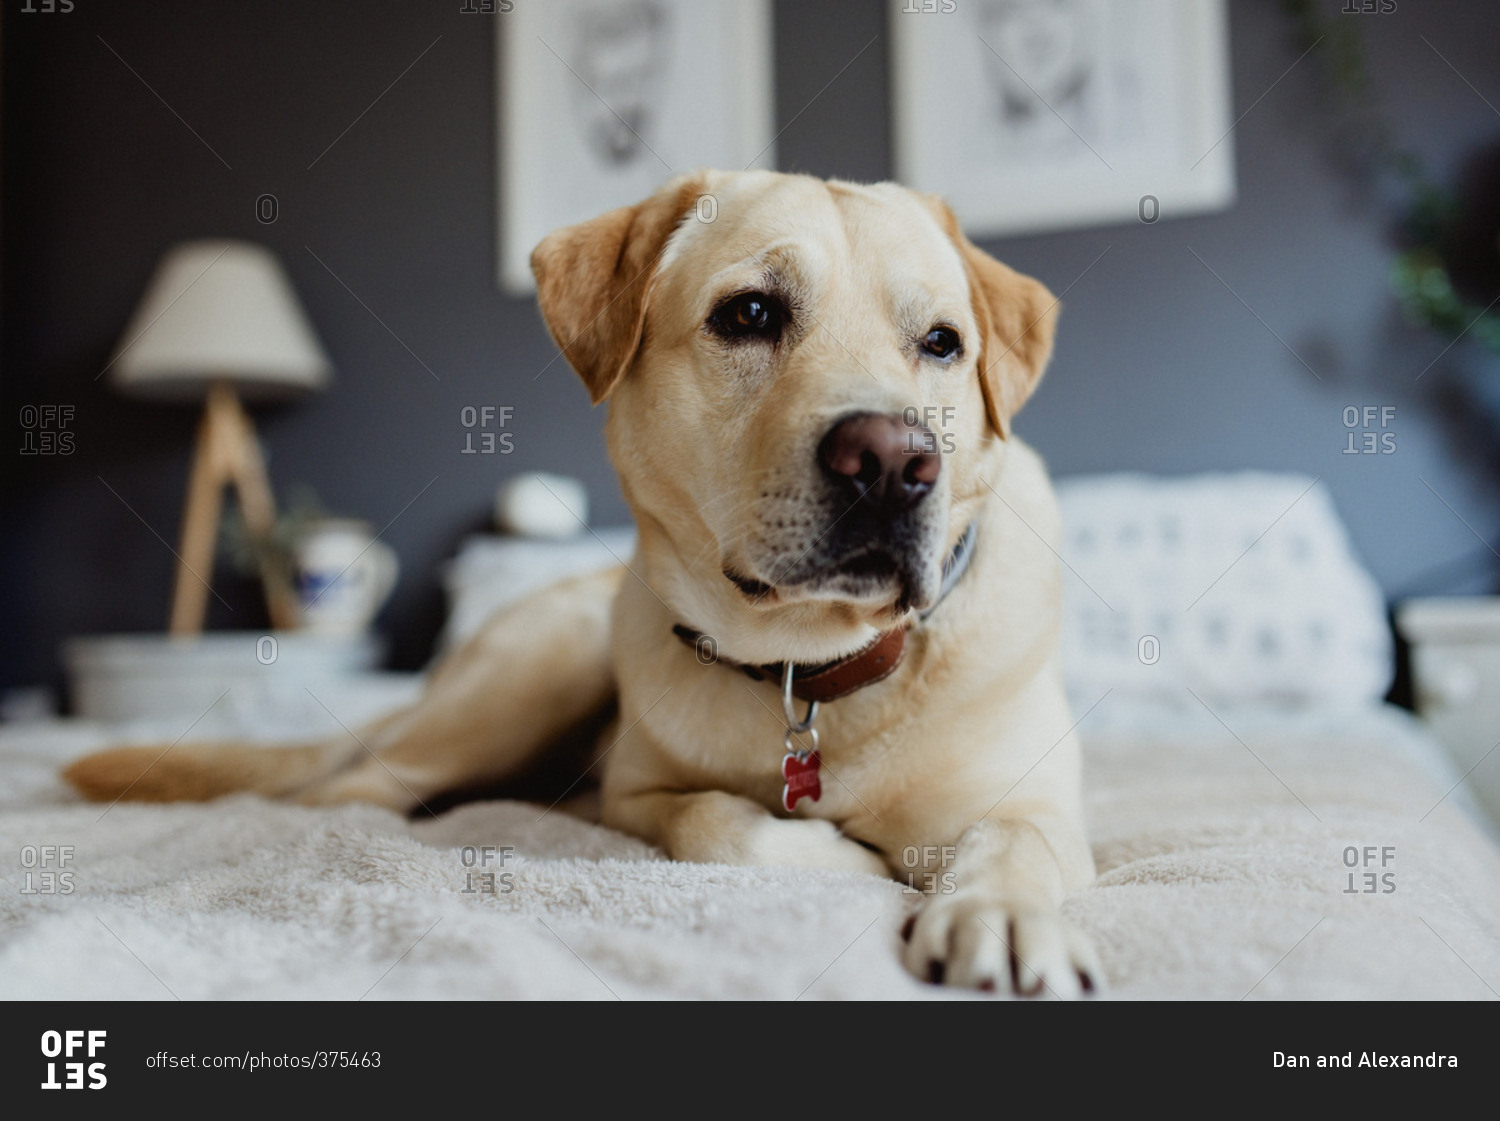 Portrait of yellow lab on bed